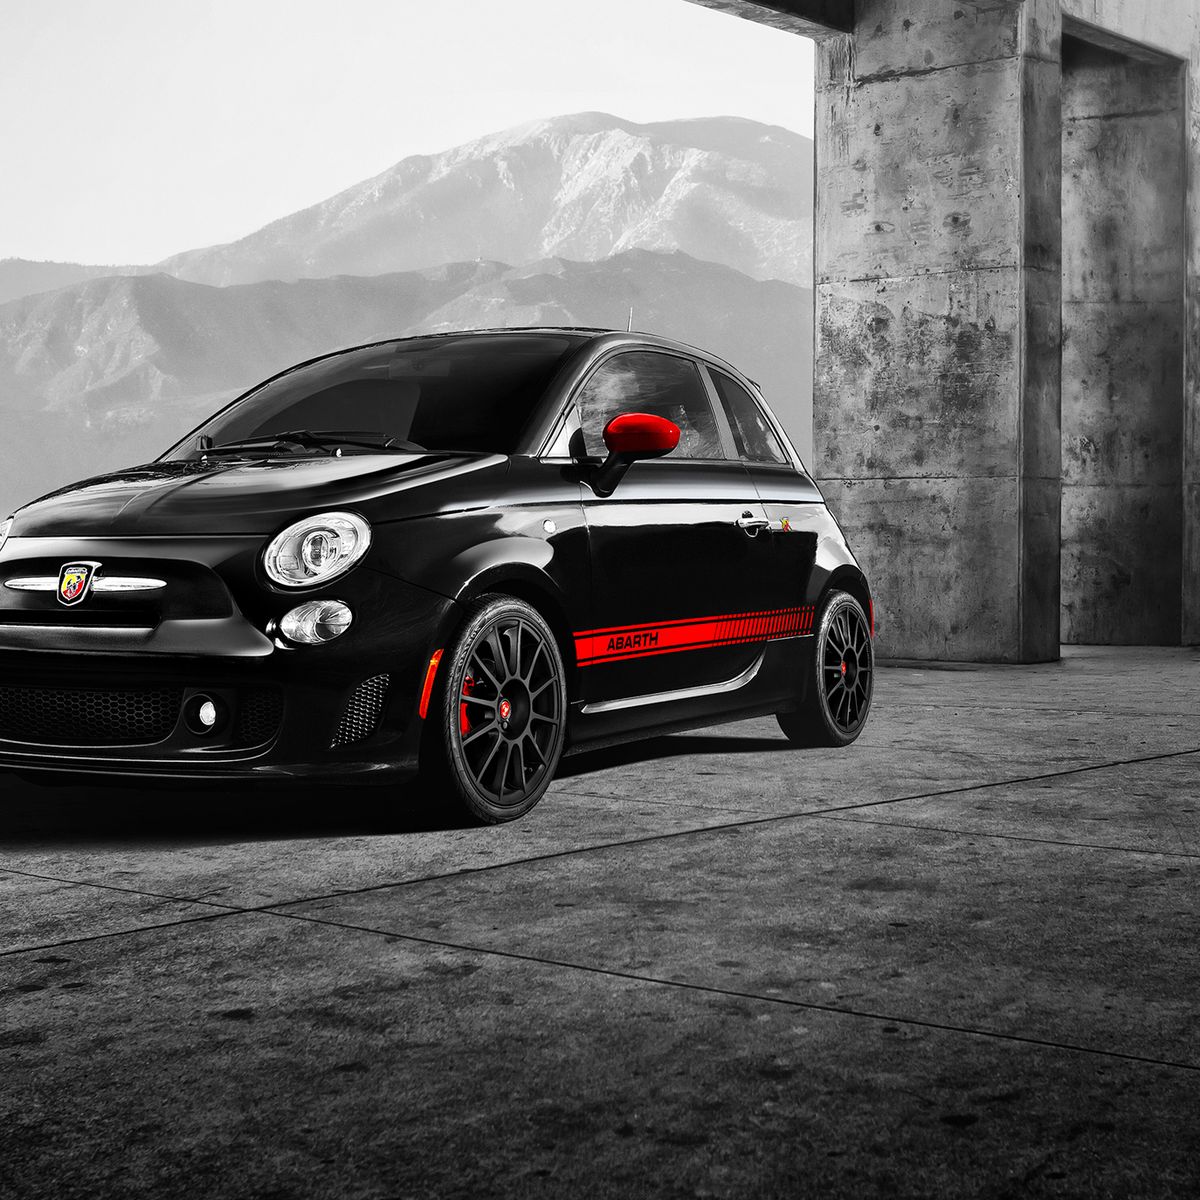 2017 FIAT 500 Review, Pricing, & Pictures